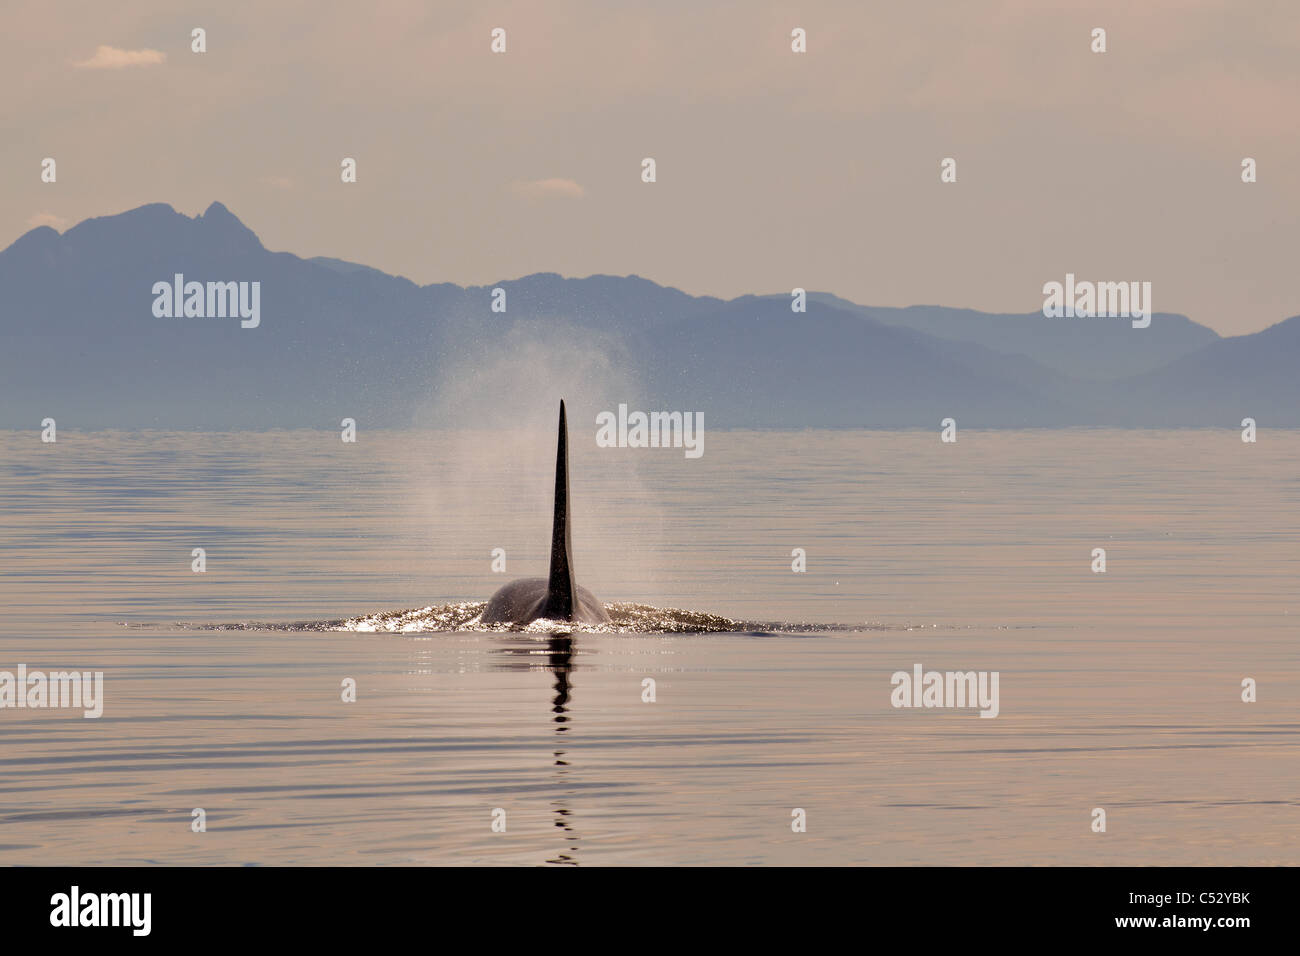 Tall dorsal fin of a large adult male Orca whale surfacing in Chatham Strait at sunset, Inside Passage, Alaska Stock Photo